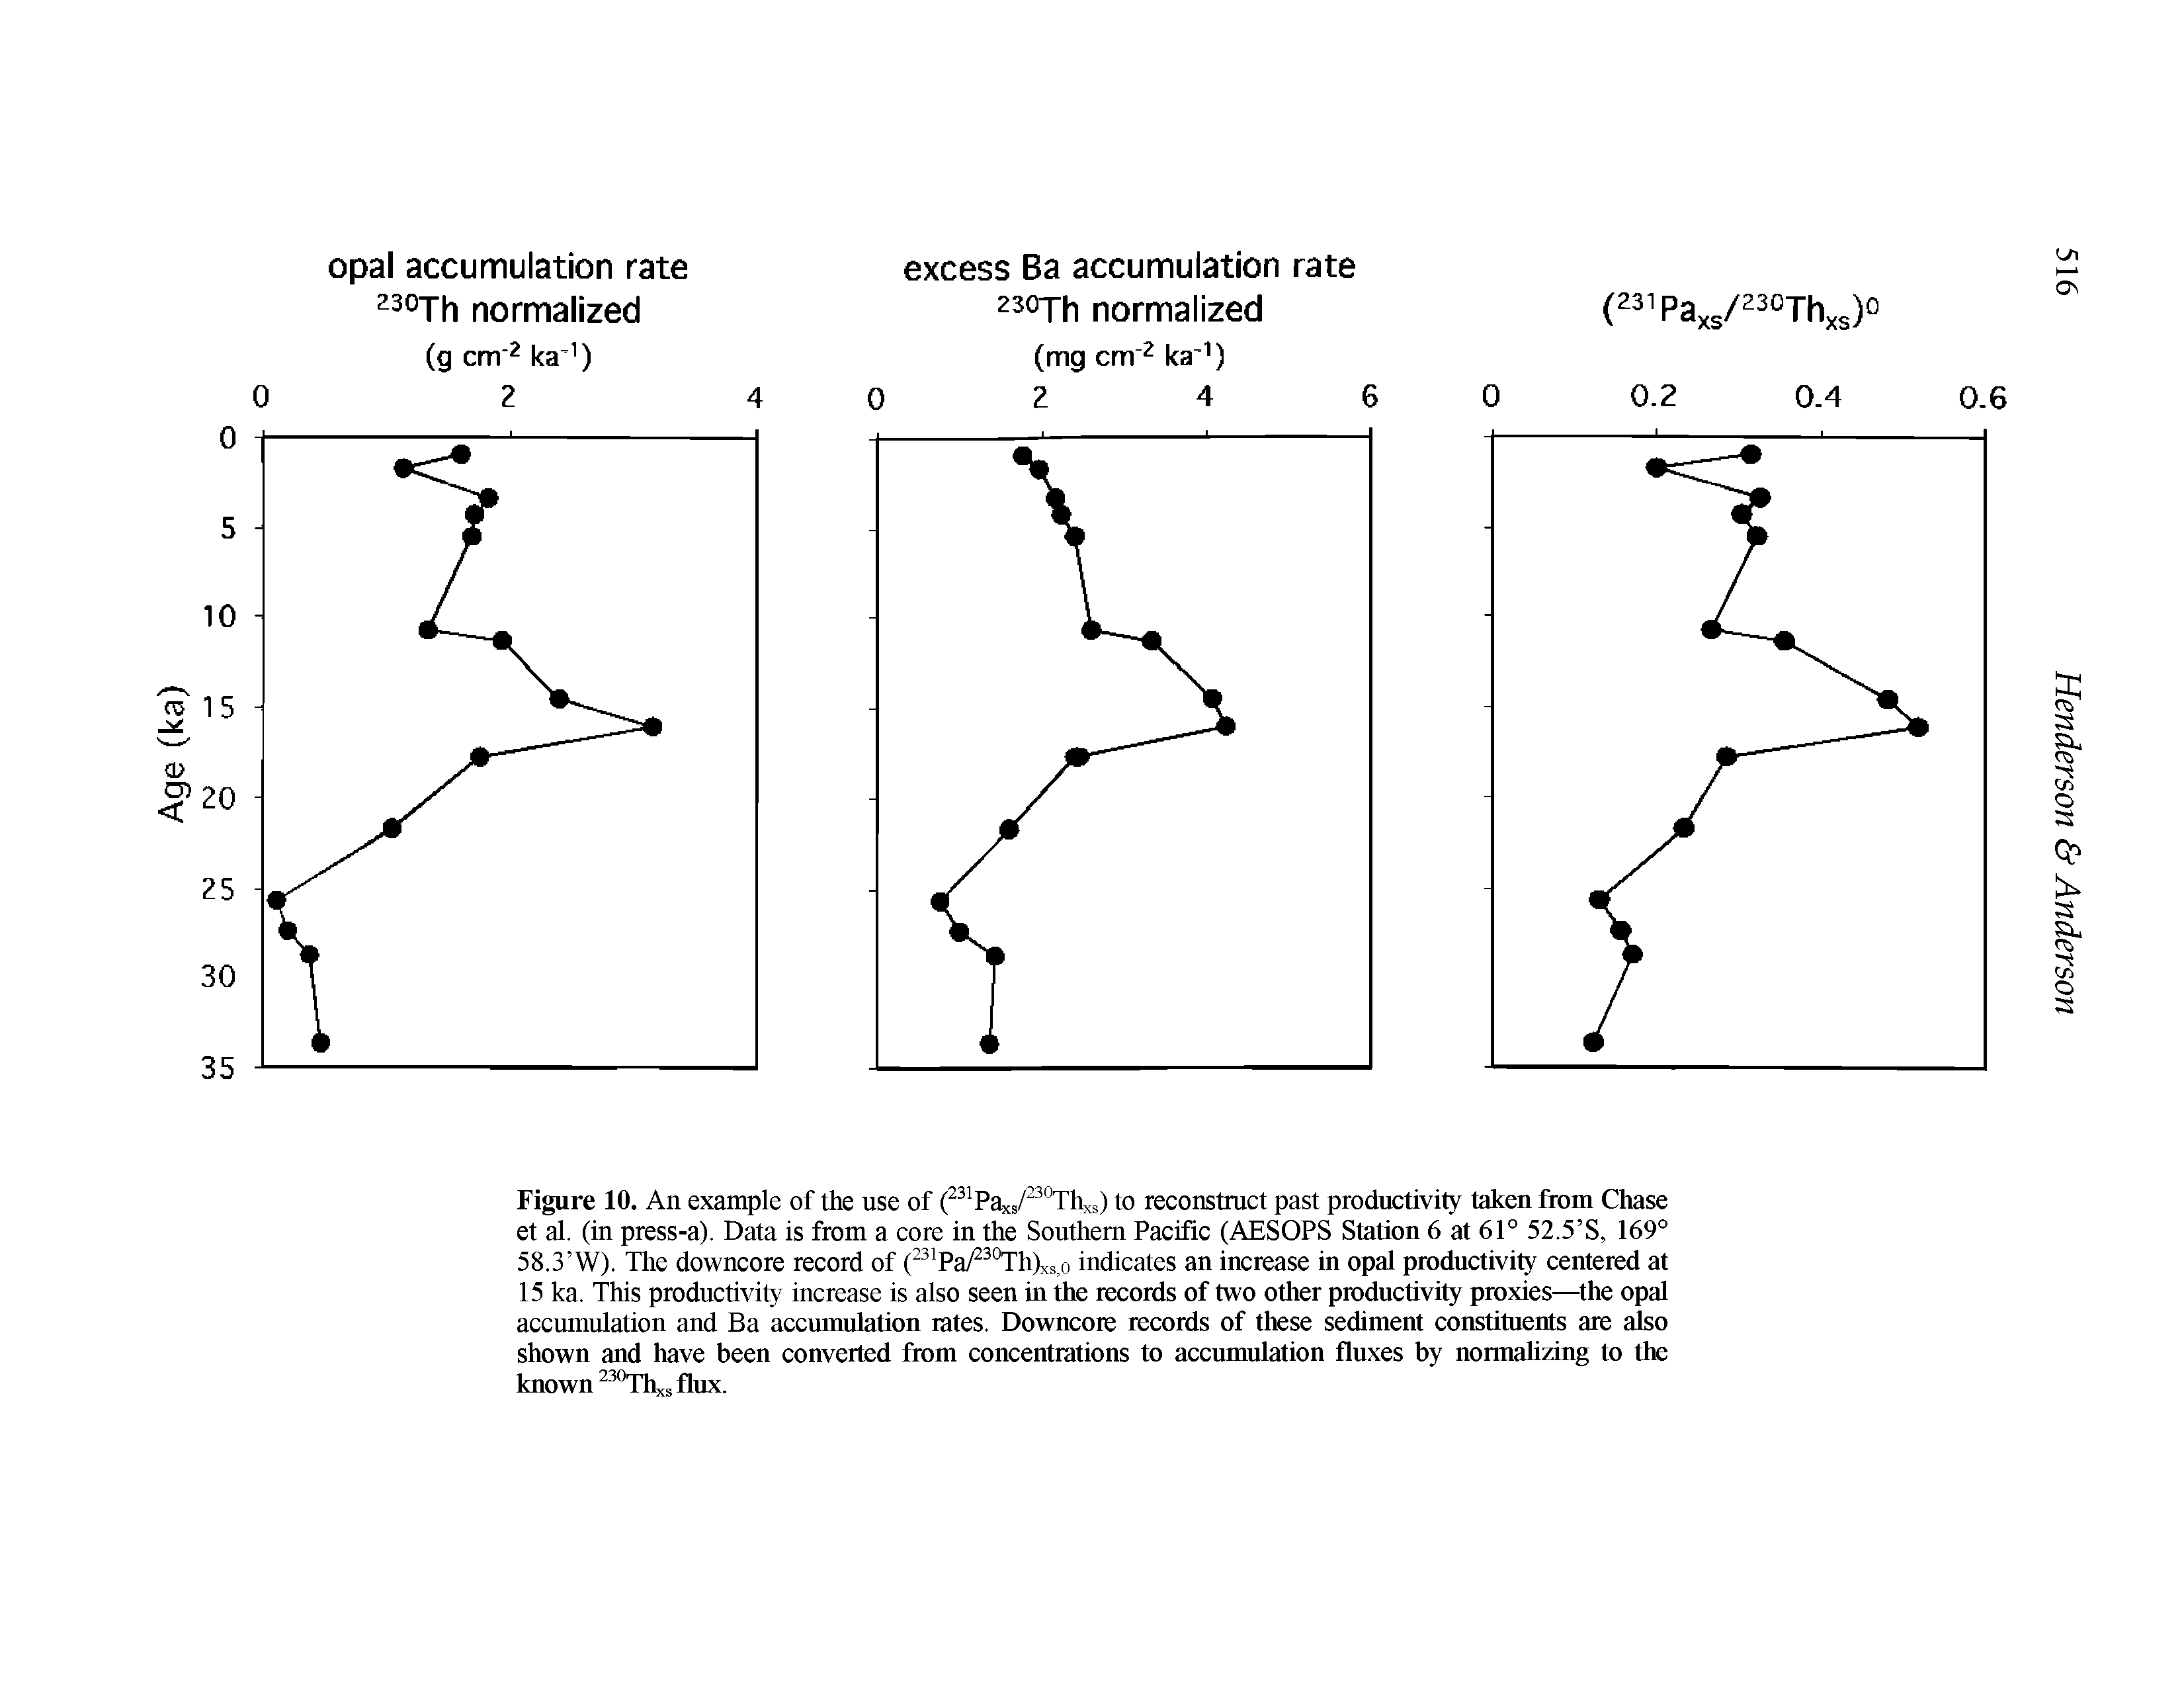 Figure 10. An example of the use of ( Paxs/ °Thxs) to reconstruct past productivity taken from Chase et al. (in press-a). Data is from a core in the Southern Pacific (AESOPS Station 6 at 61° 52.5 S, 169° 58.3 W). The downcore record of ( Pa/ °Th)xs,o indicates an increase in opal productivity centered at 15 ka. This productivity increase is also seen in the records of two other productivity proxies— the opal accumulation and Ba accumulation rates. Downcore records of these sediment constituents are also shown and have been converted from concentrations to accumulation fluxes by normalizing to the known °Thx, flux.